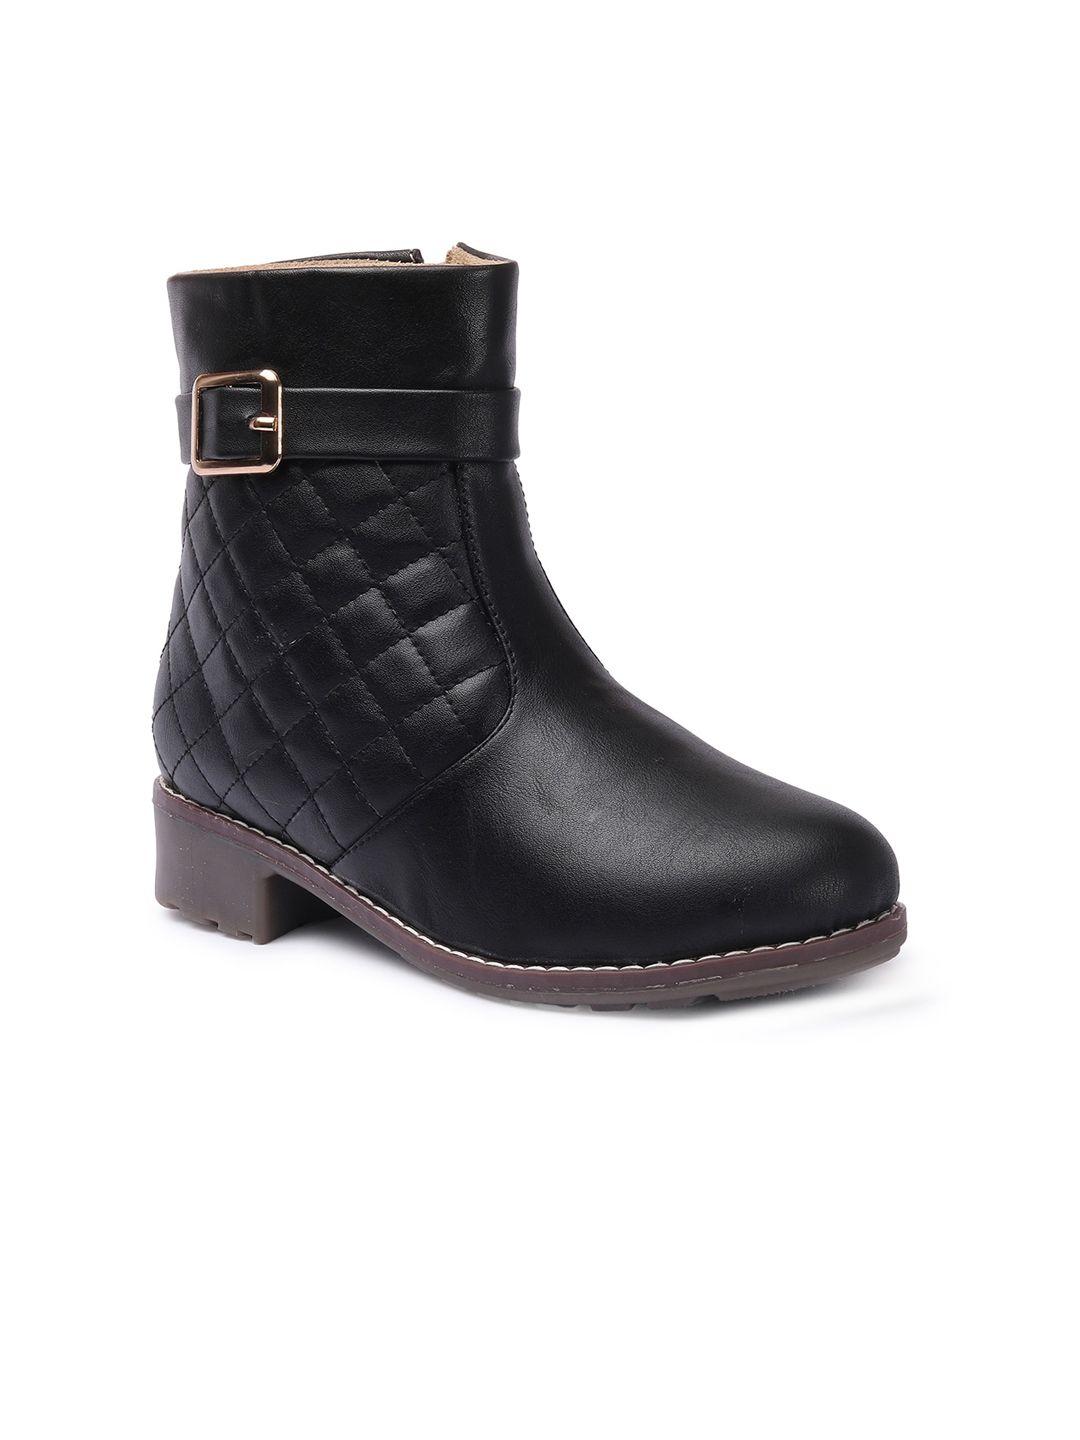 picktoes women black textured synthetic heeled boots